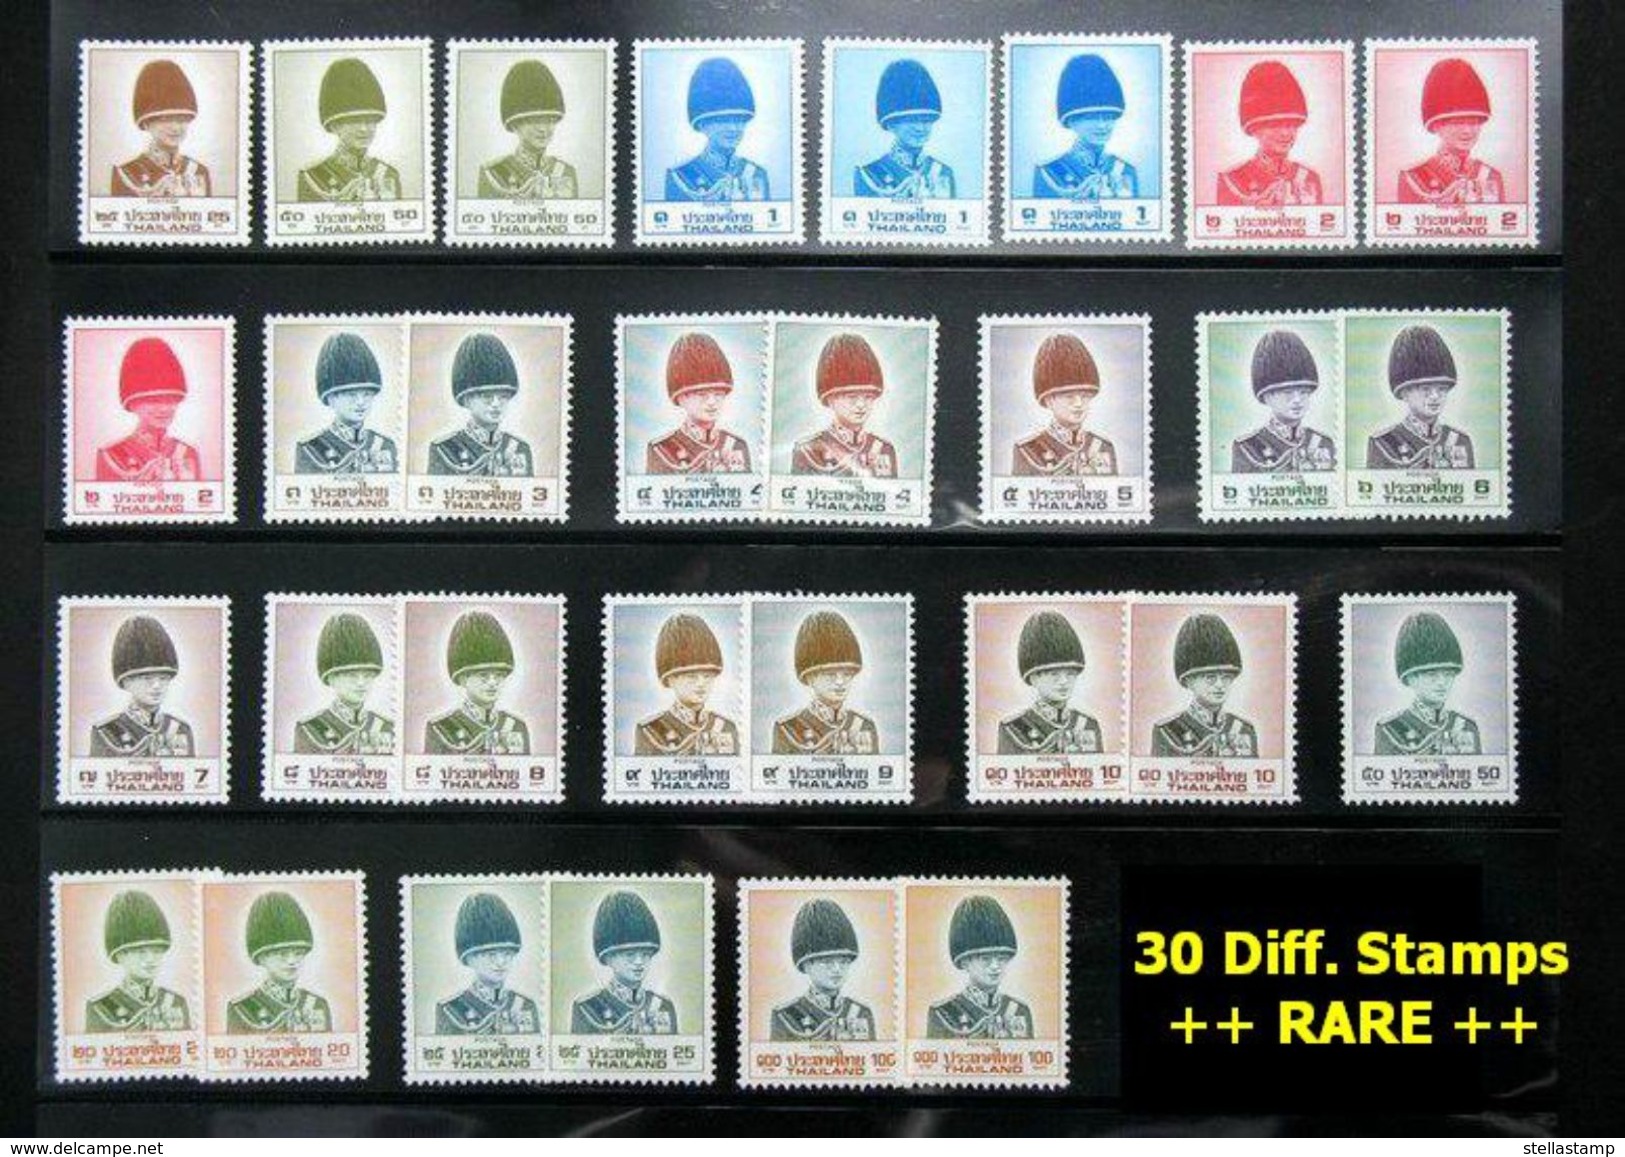 Thailand Stamp Definitive King Rama 9 8th Series Completed Plate 1+2 (30) - Tailandia